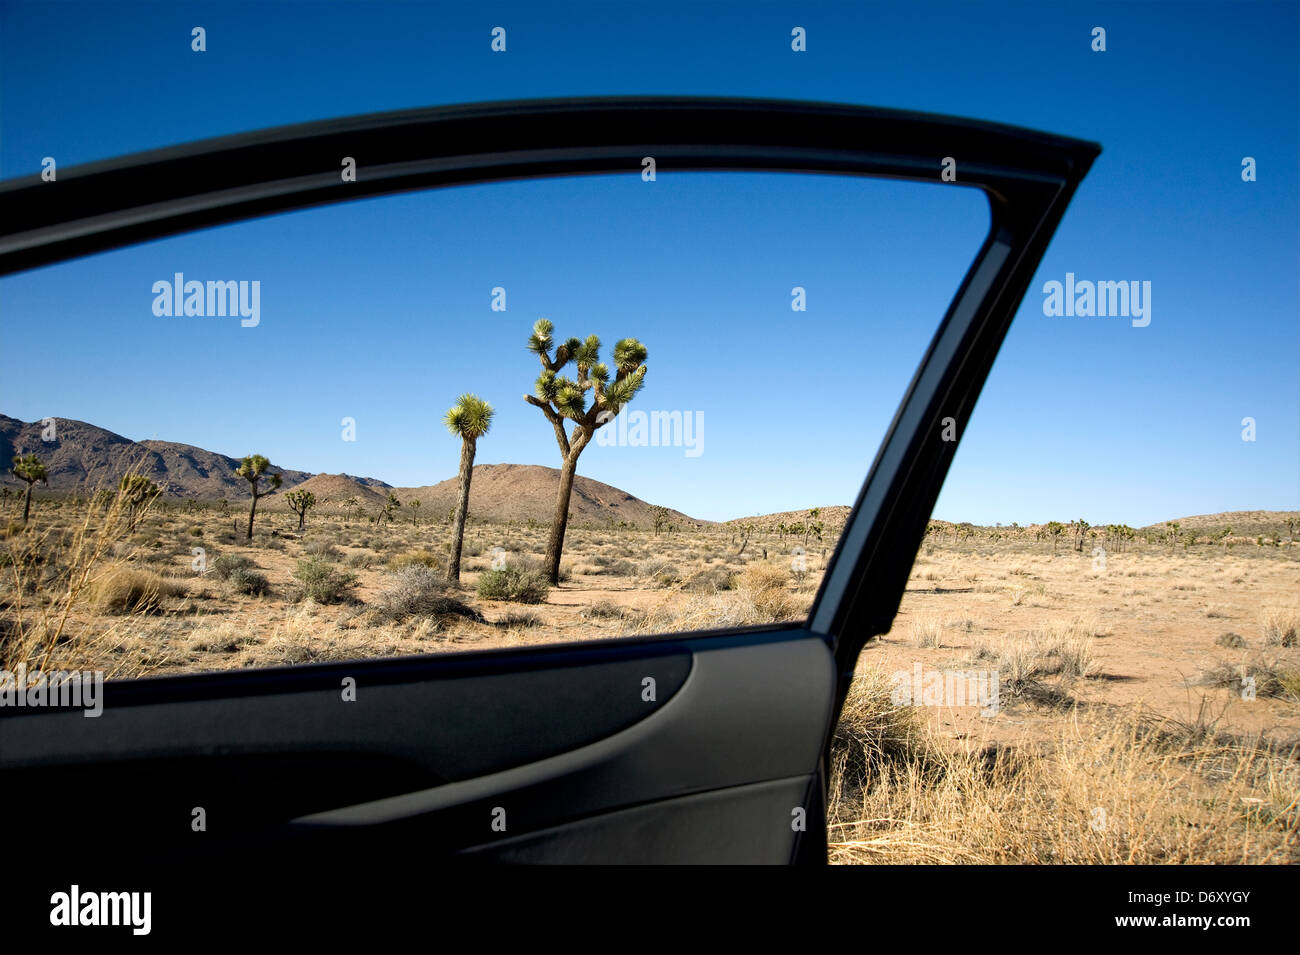 High Desert landscape at Joshua Tree National Park in California viewed from window of open car door Stock Photo